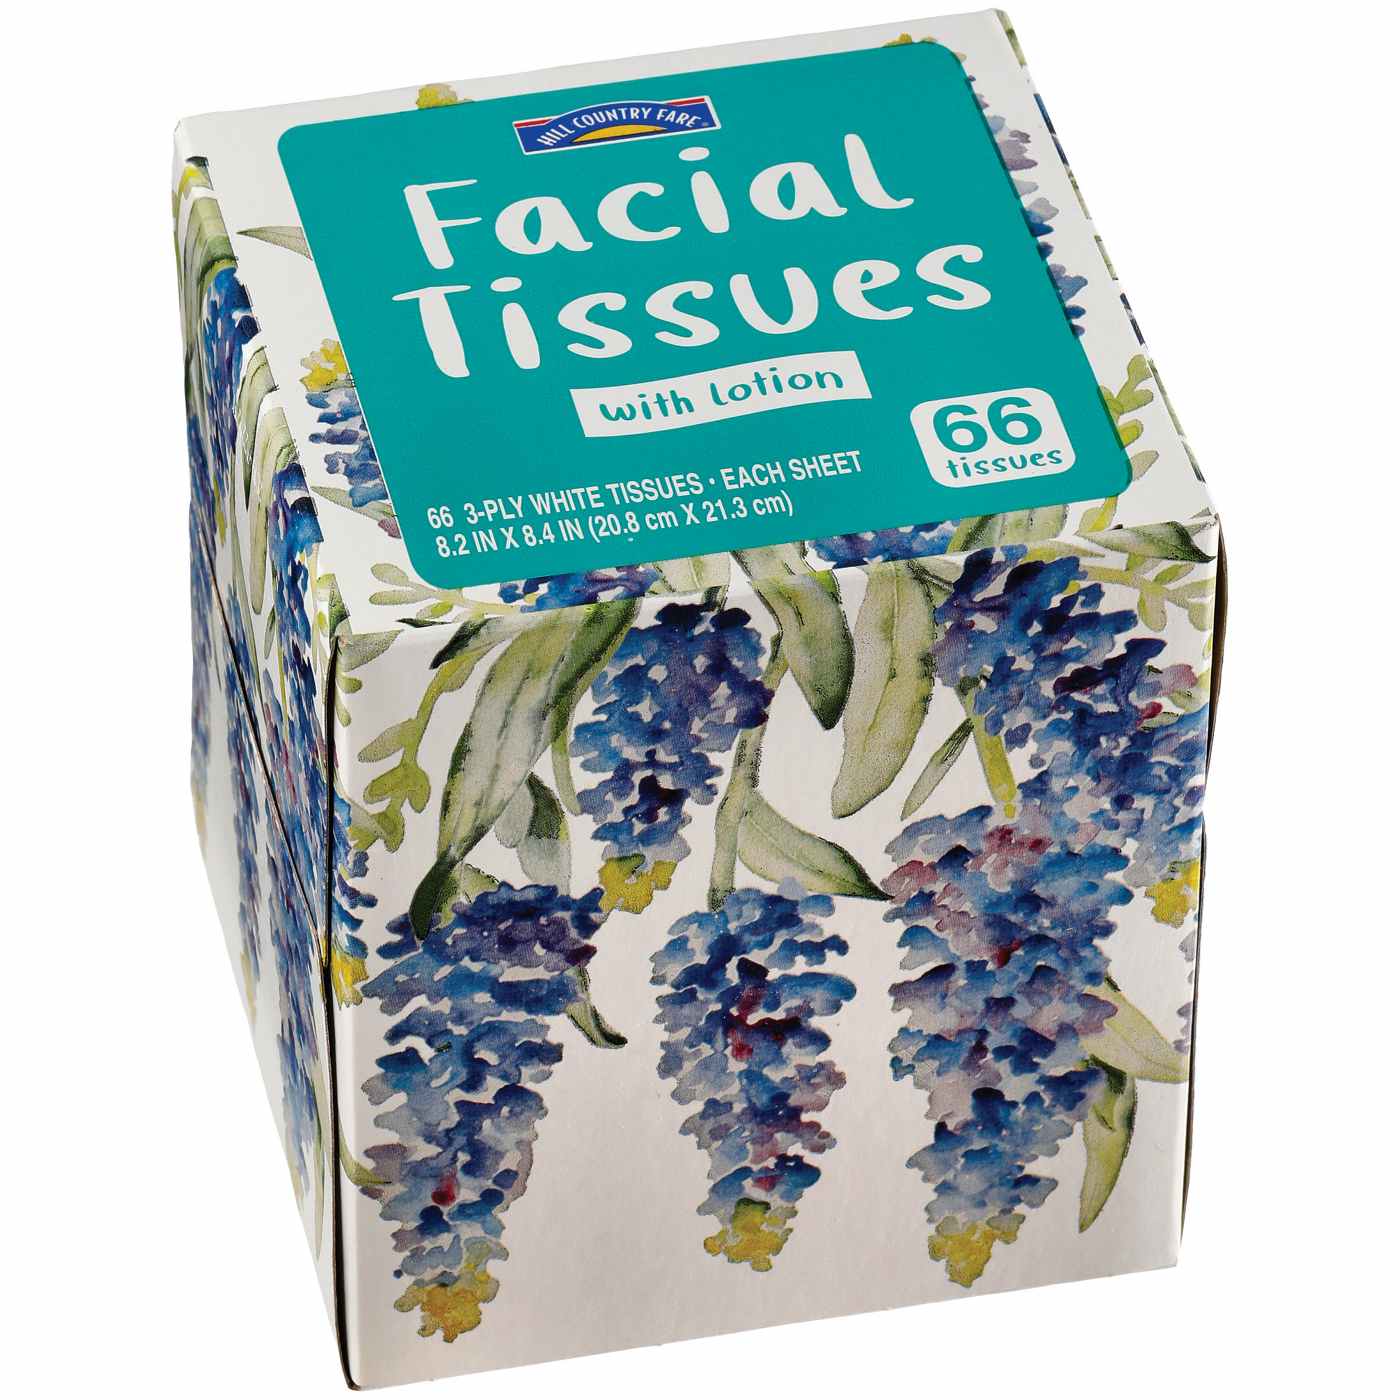 Hill Country Fare Lotion Facial Tissues; image 1 of 4